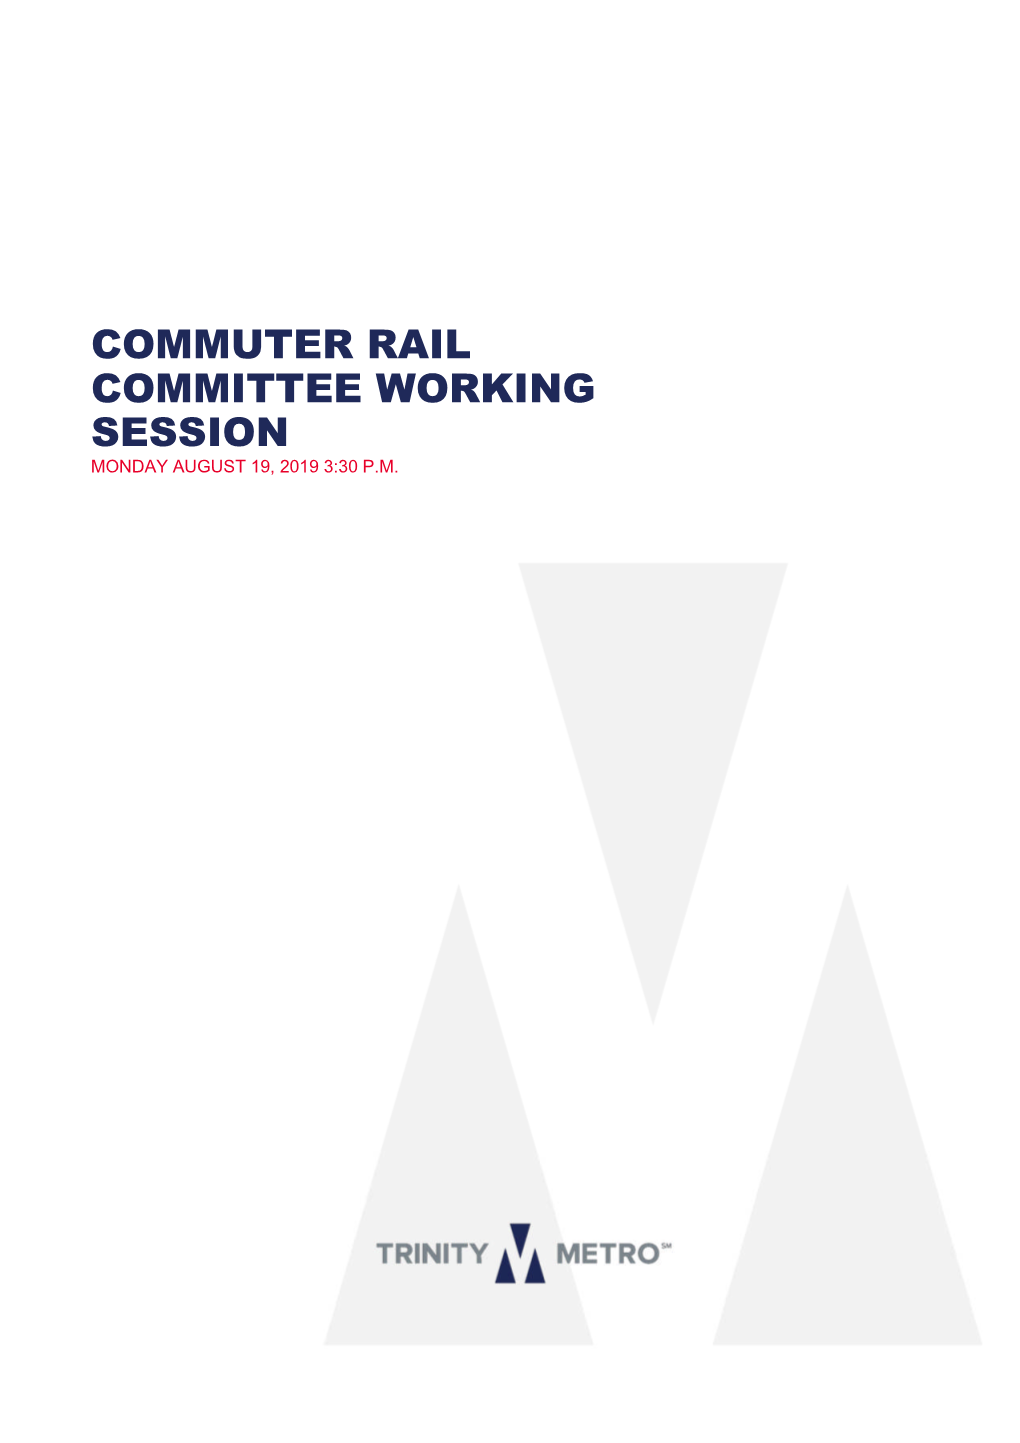 Commuter Rail Committee Working Session Monday August 19, 2019 3:30 P.M